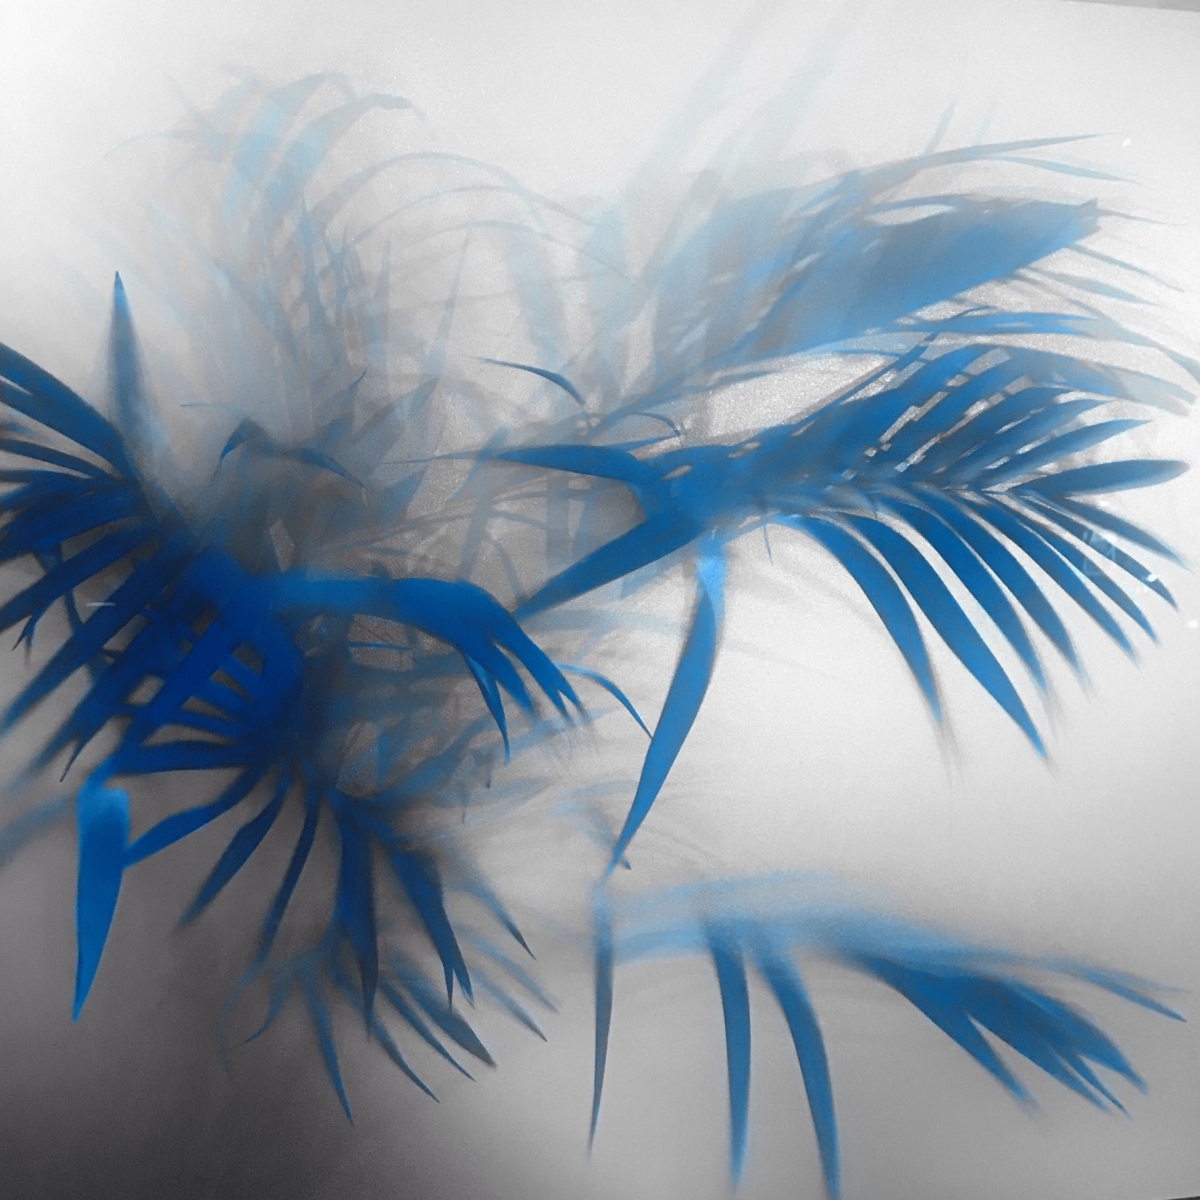 Hazy foggy picture of palm fronds tinted in blue